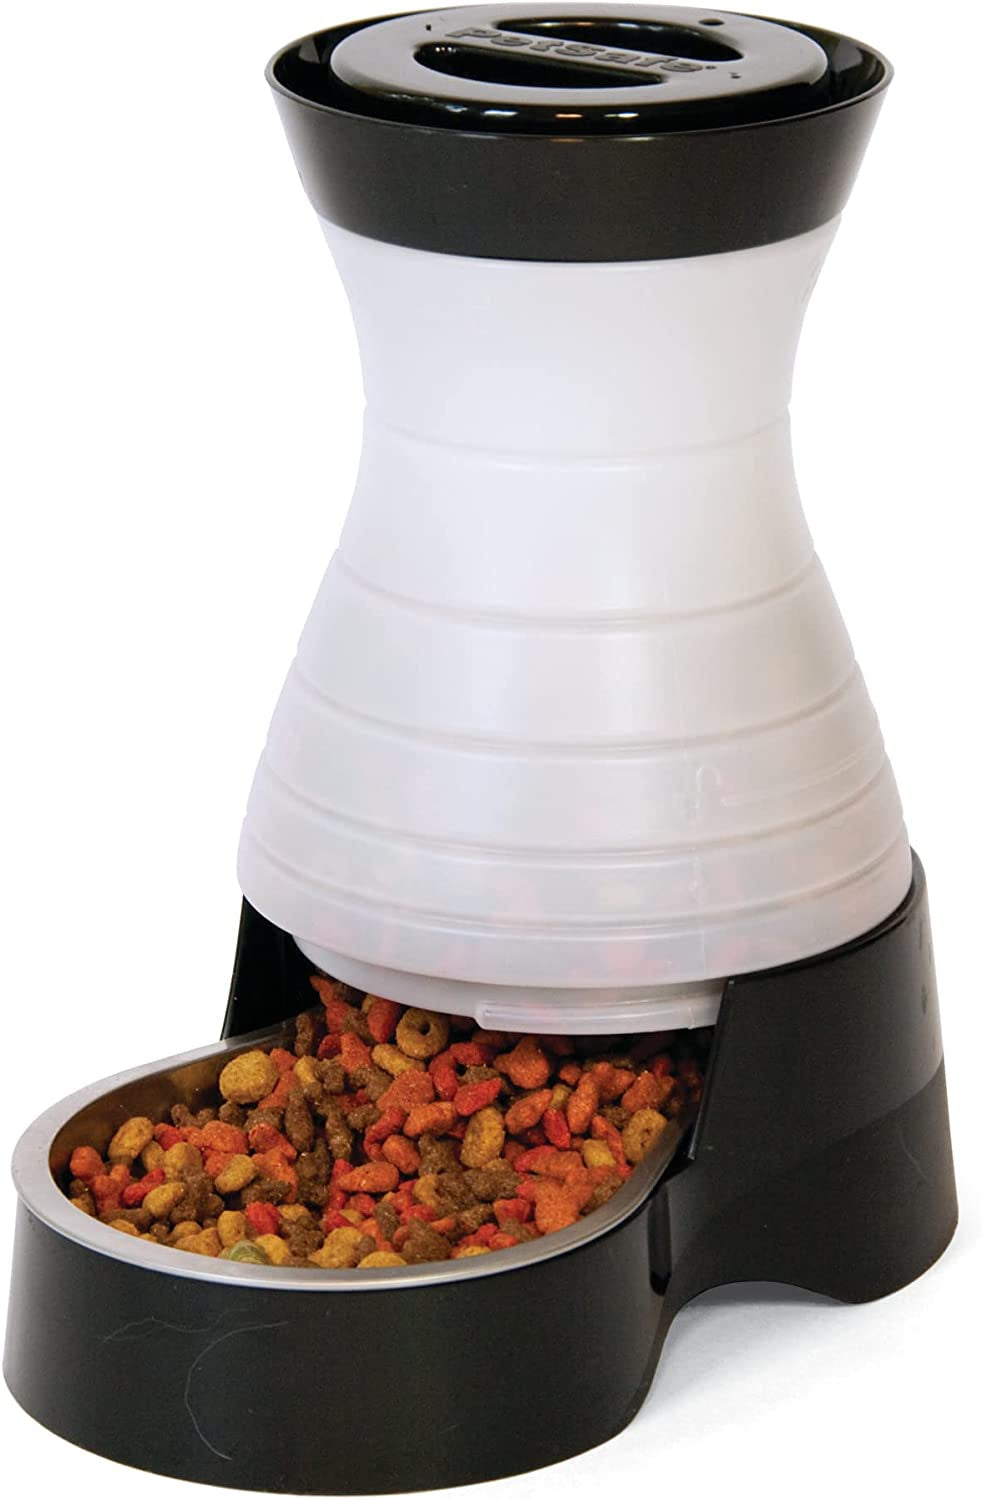 Petsafe Healthy Pet Food Station or Water Station - Gravity Feeders or Pet Water Dispensers - Automatic Cat Feeder, Dog Feeder, Pet Feeder - Dog or Cat Water Fountain, Pet Water Fountain, Waterer